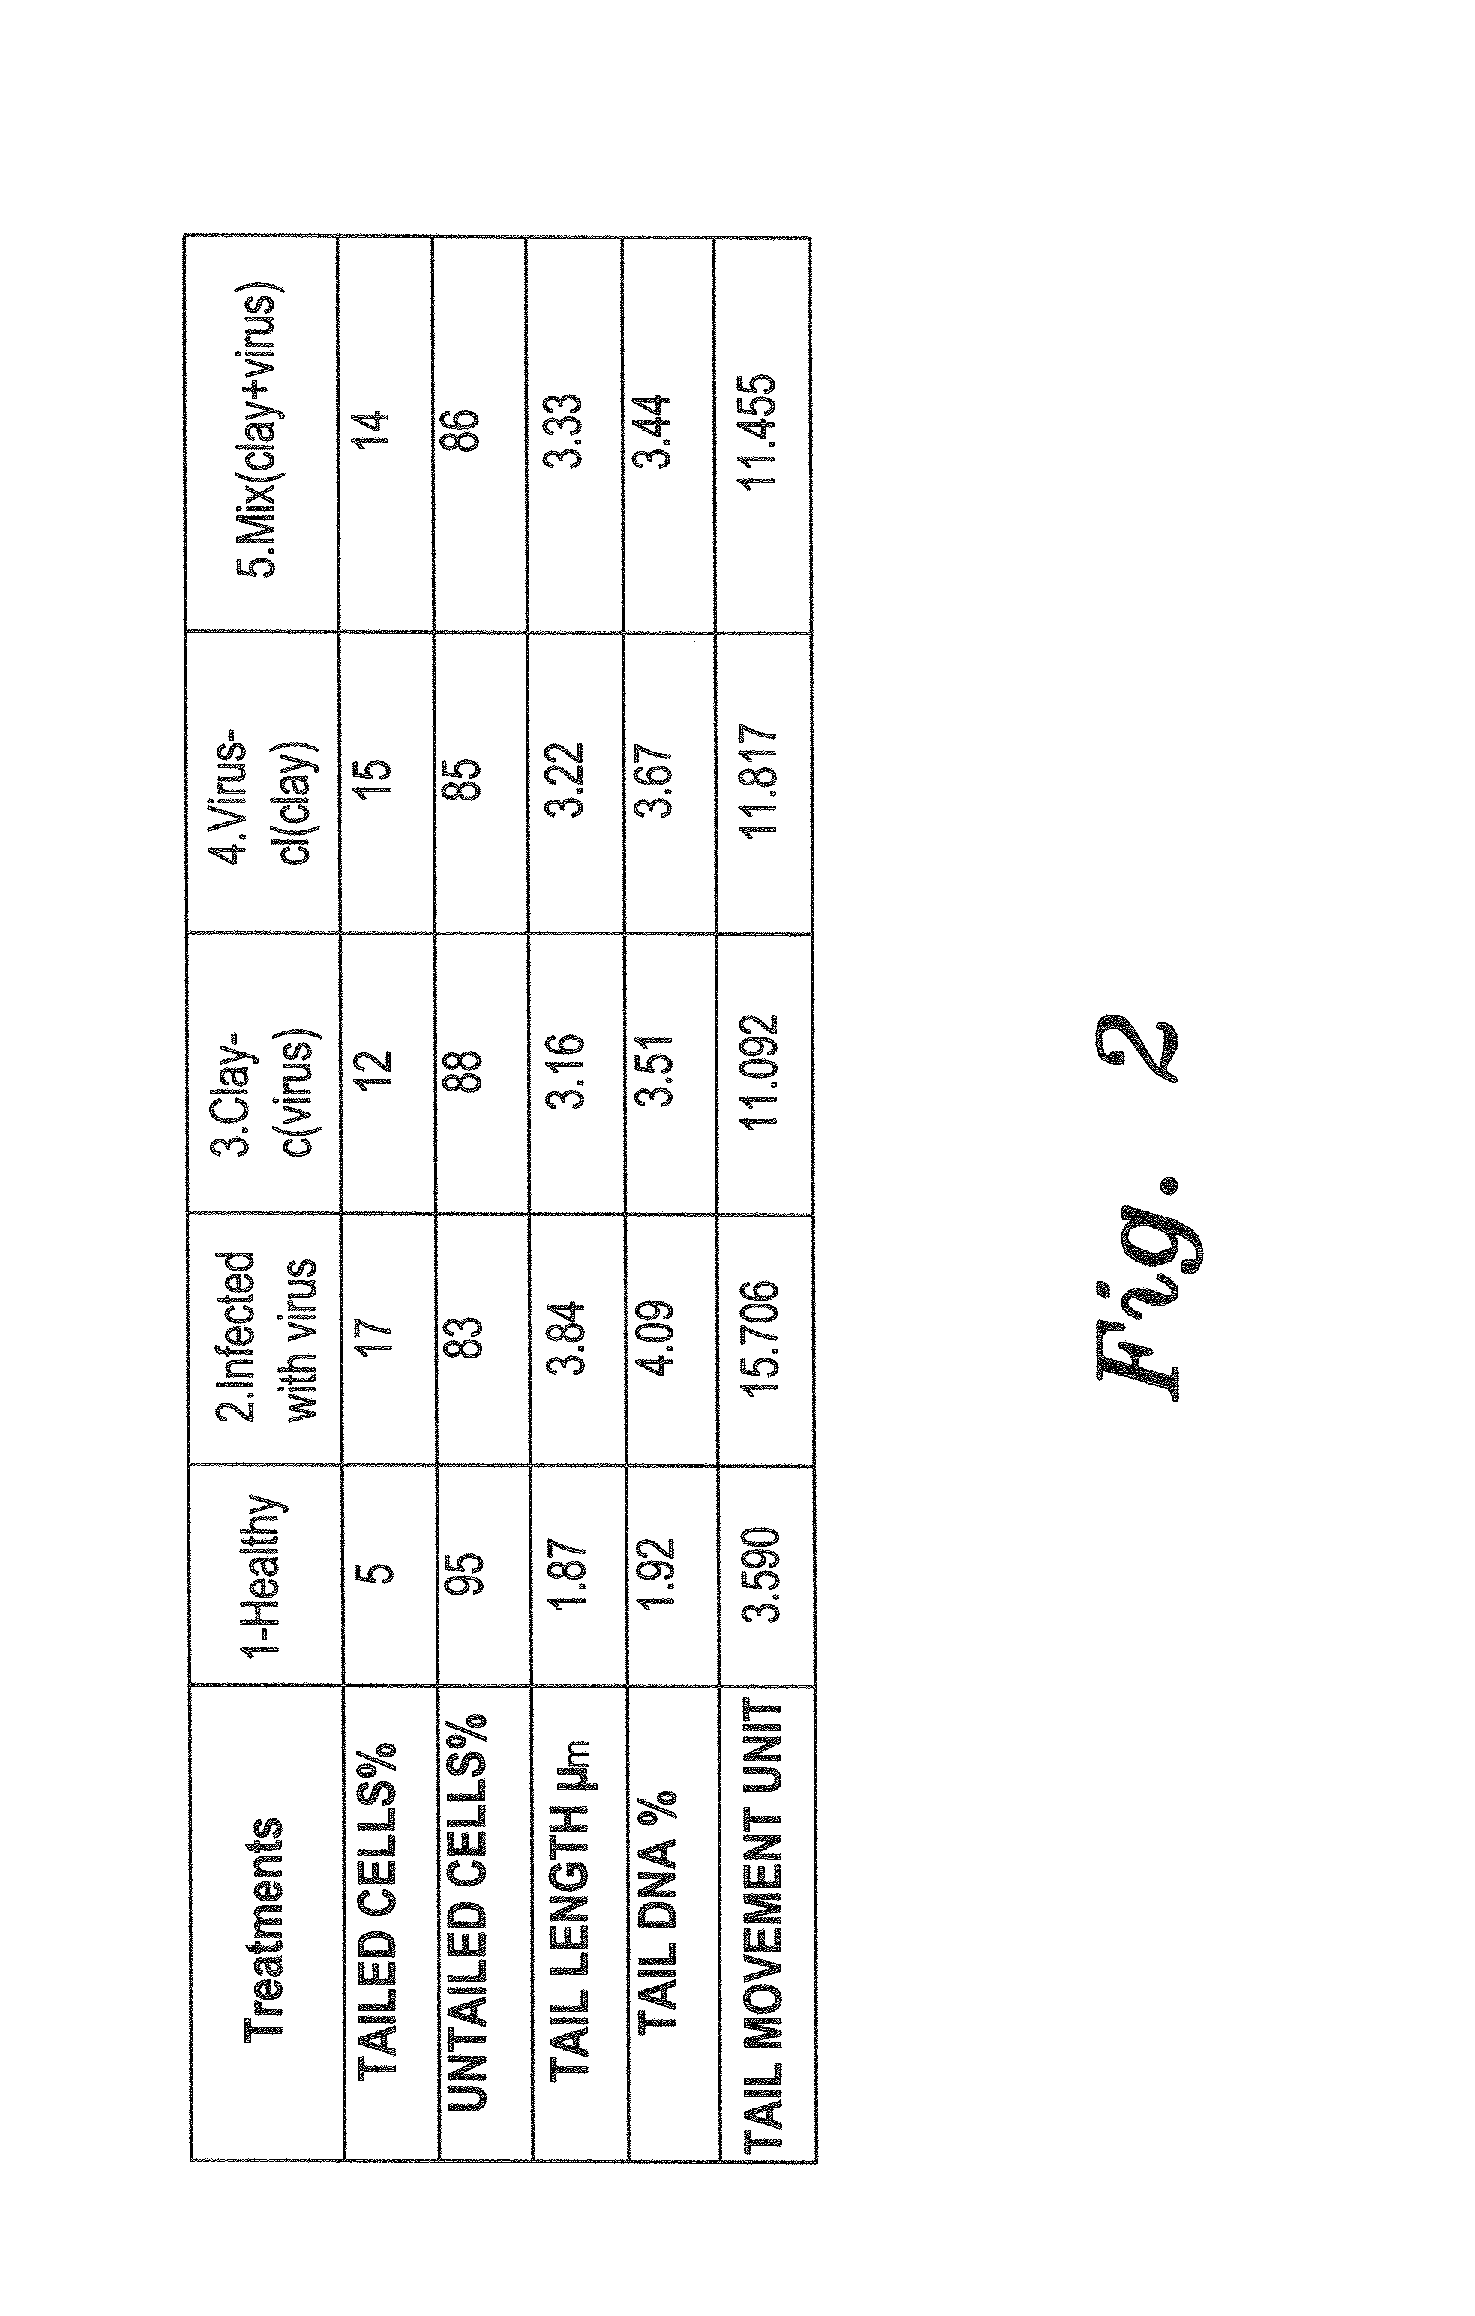 Method of using a clay suspension to prevent viral and phytoplasma diseases in plants